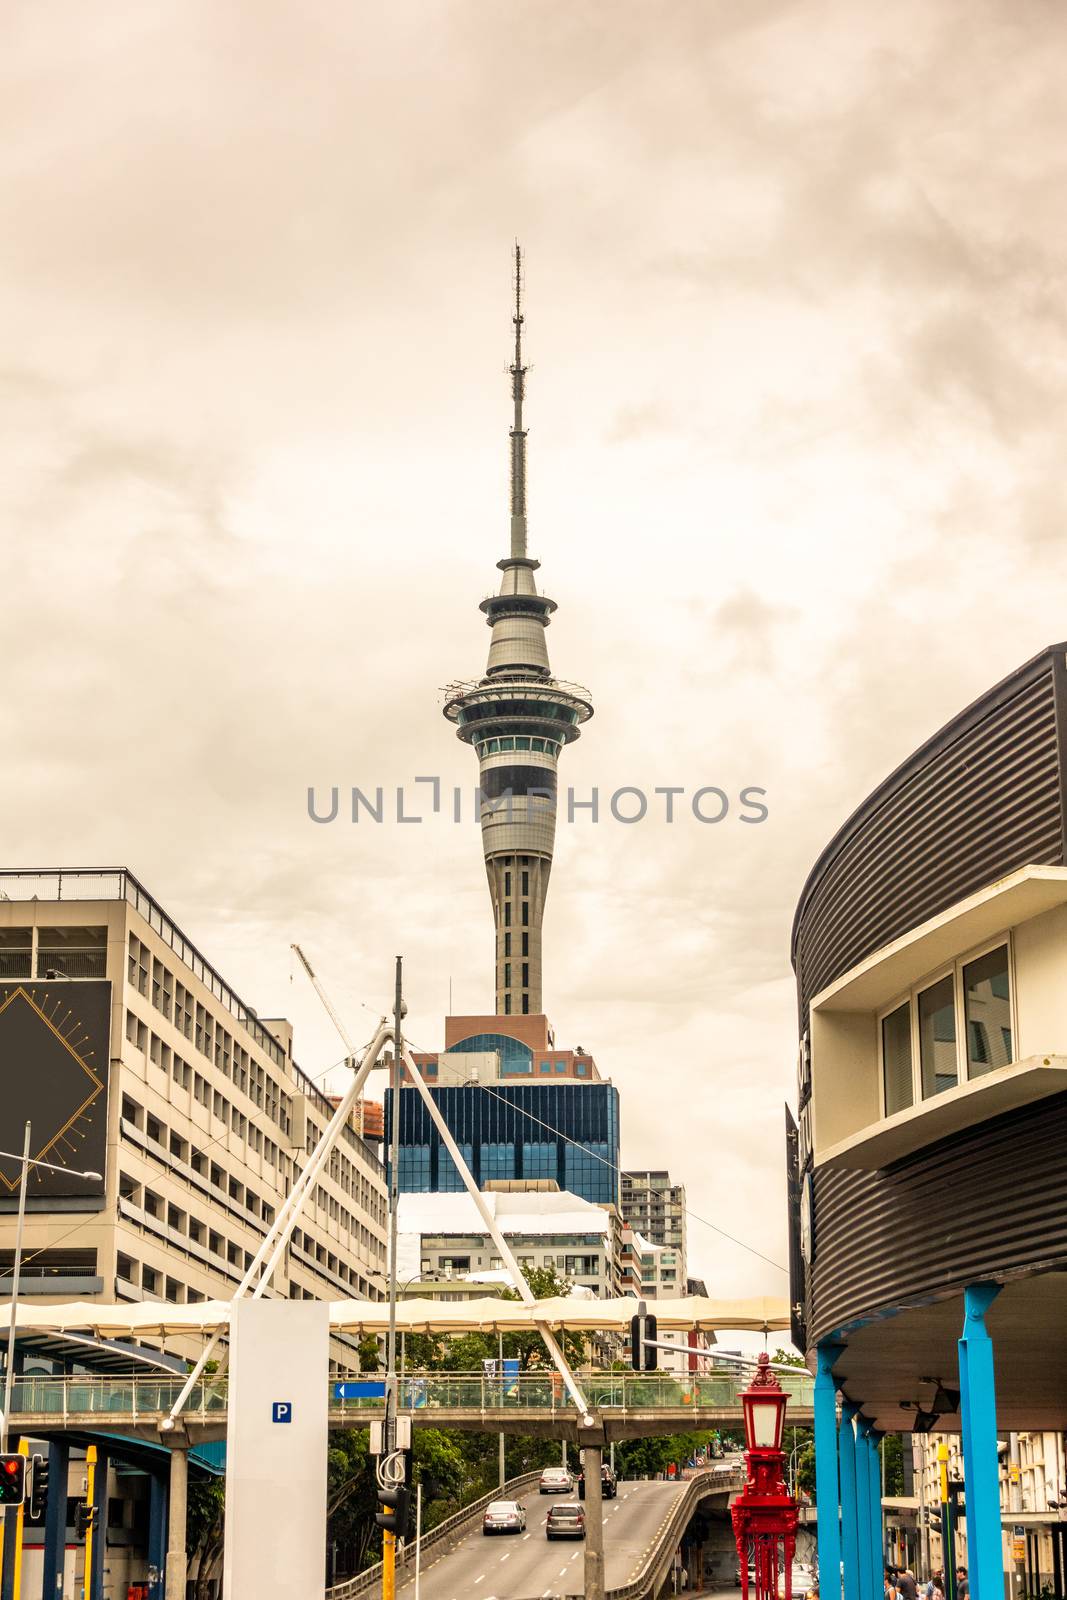 An image of the tower at Auckland New Zealand